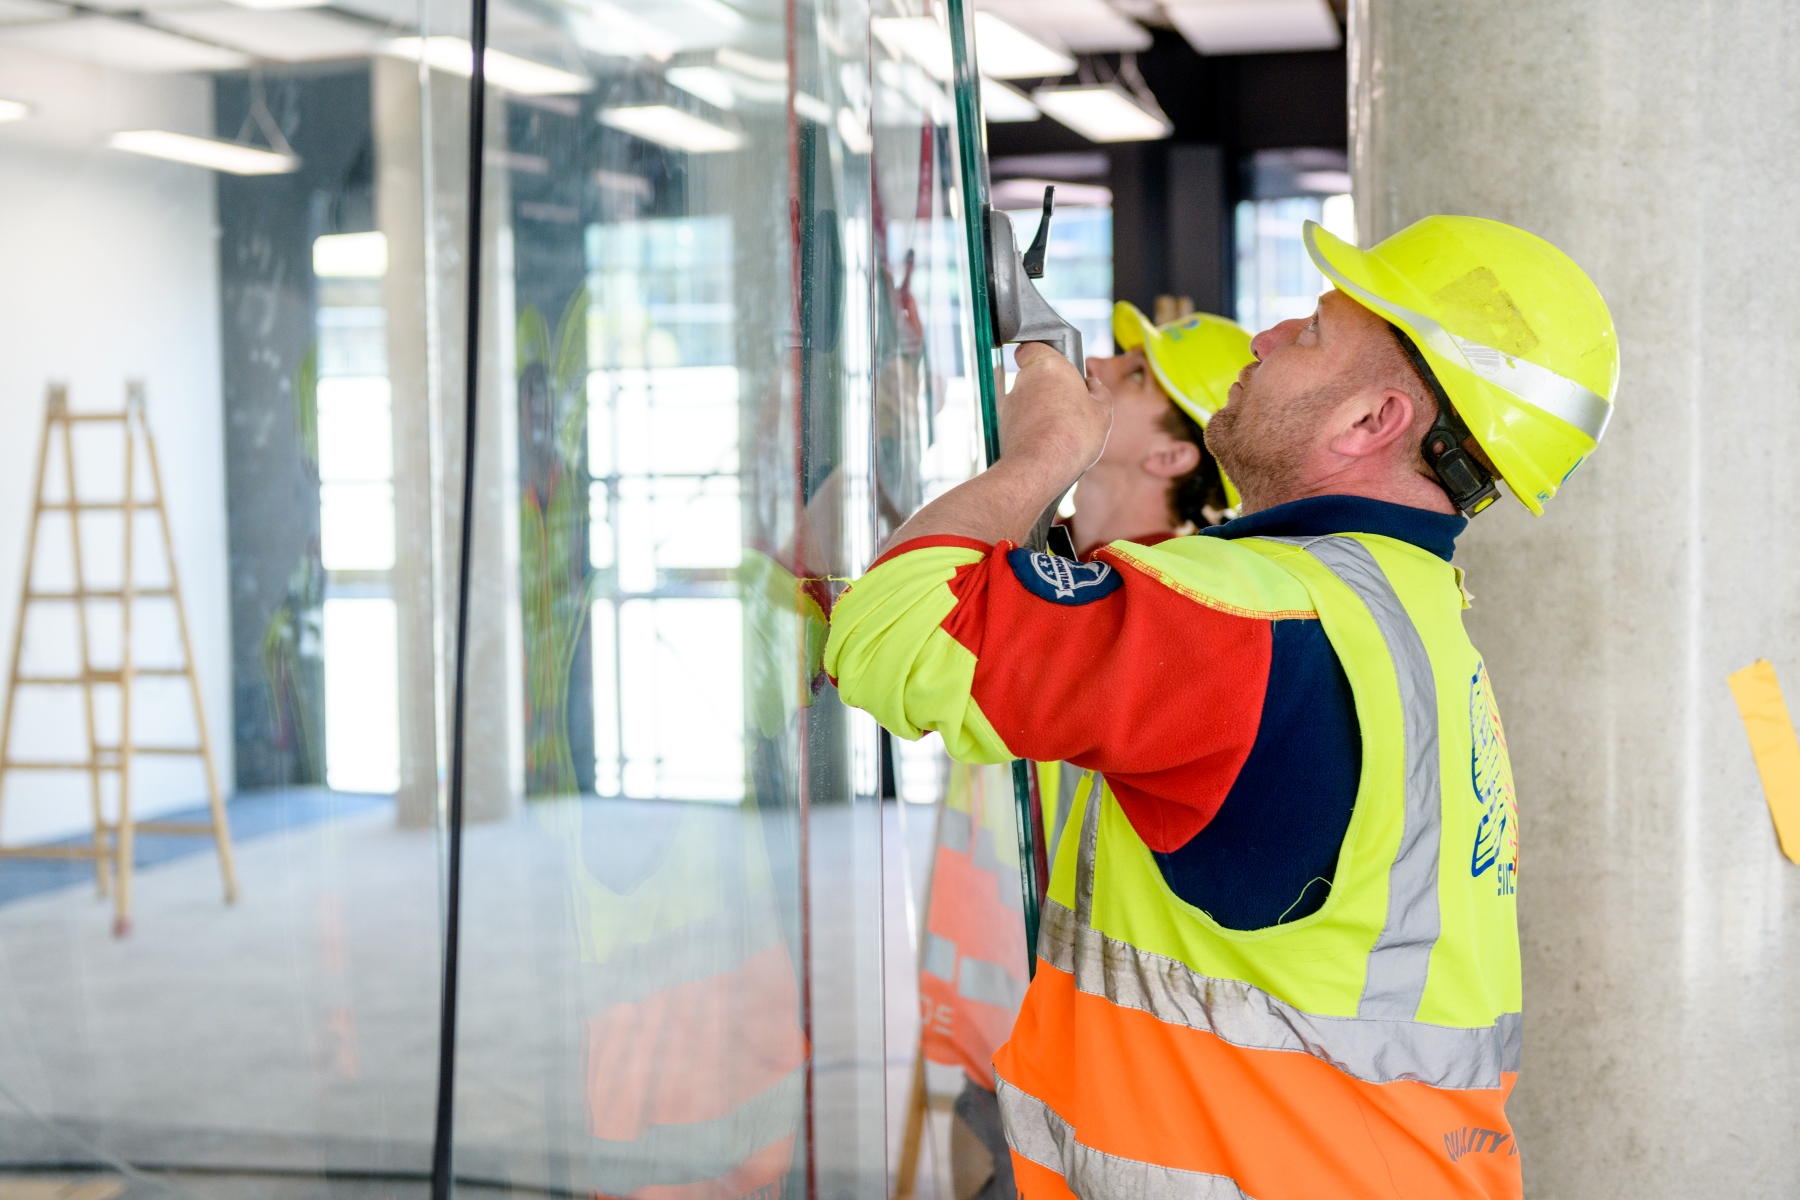 Fitters install partitions in the interior of a building in Ostrava.